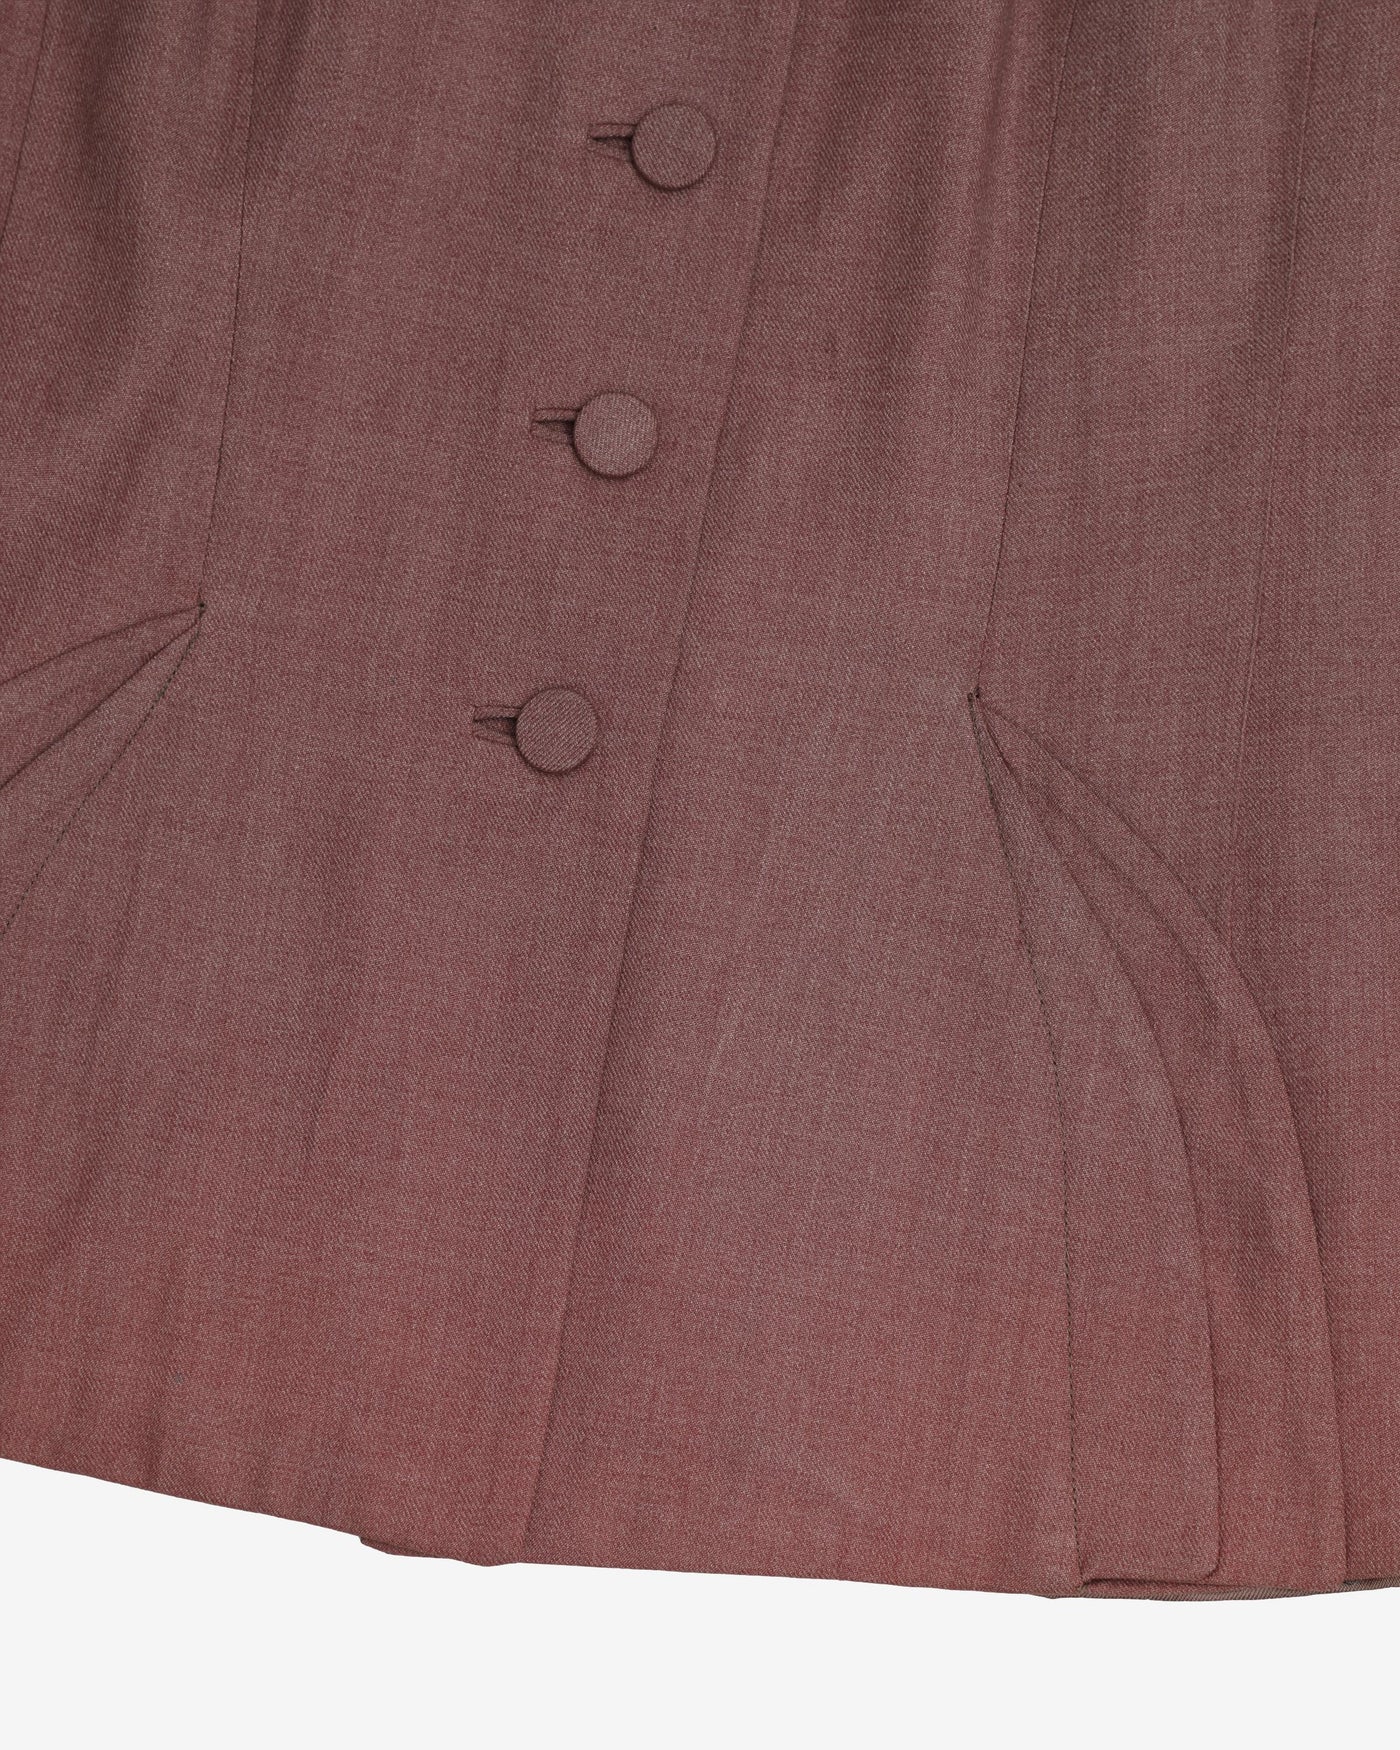 1940s cherry pink tailored suit jacket - s